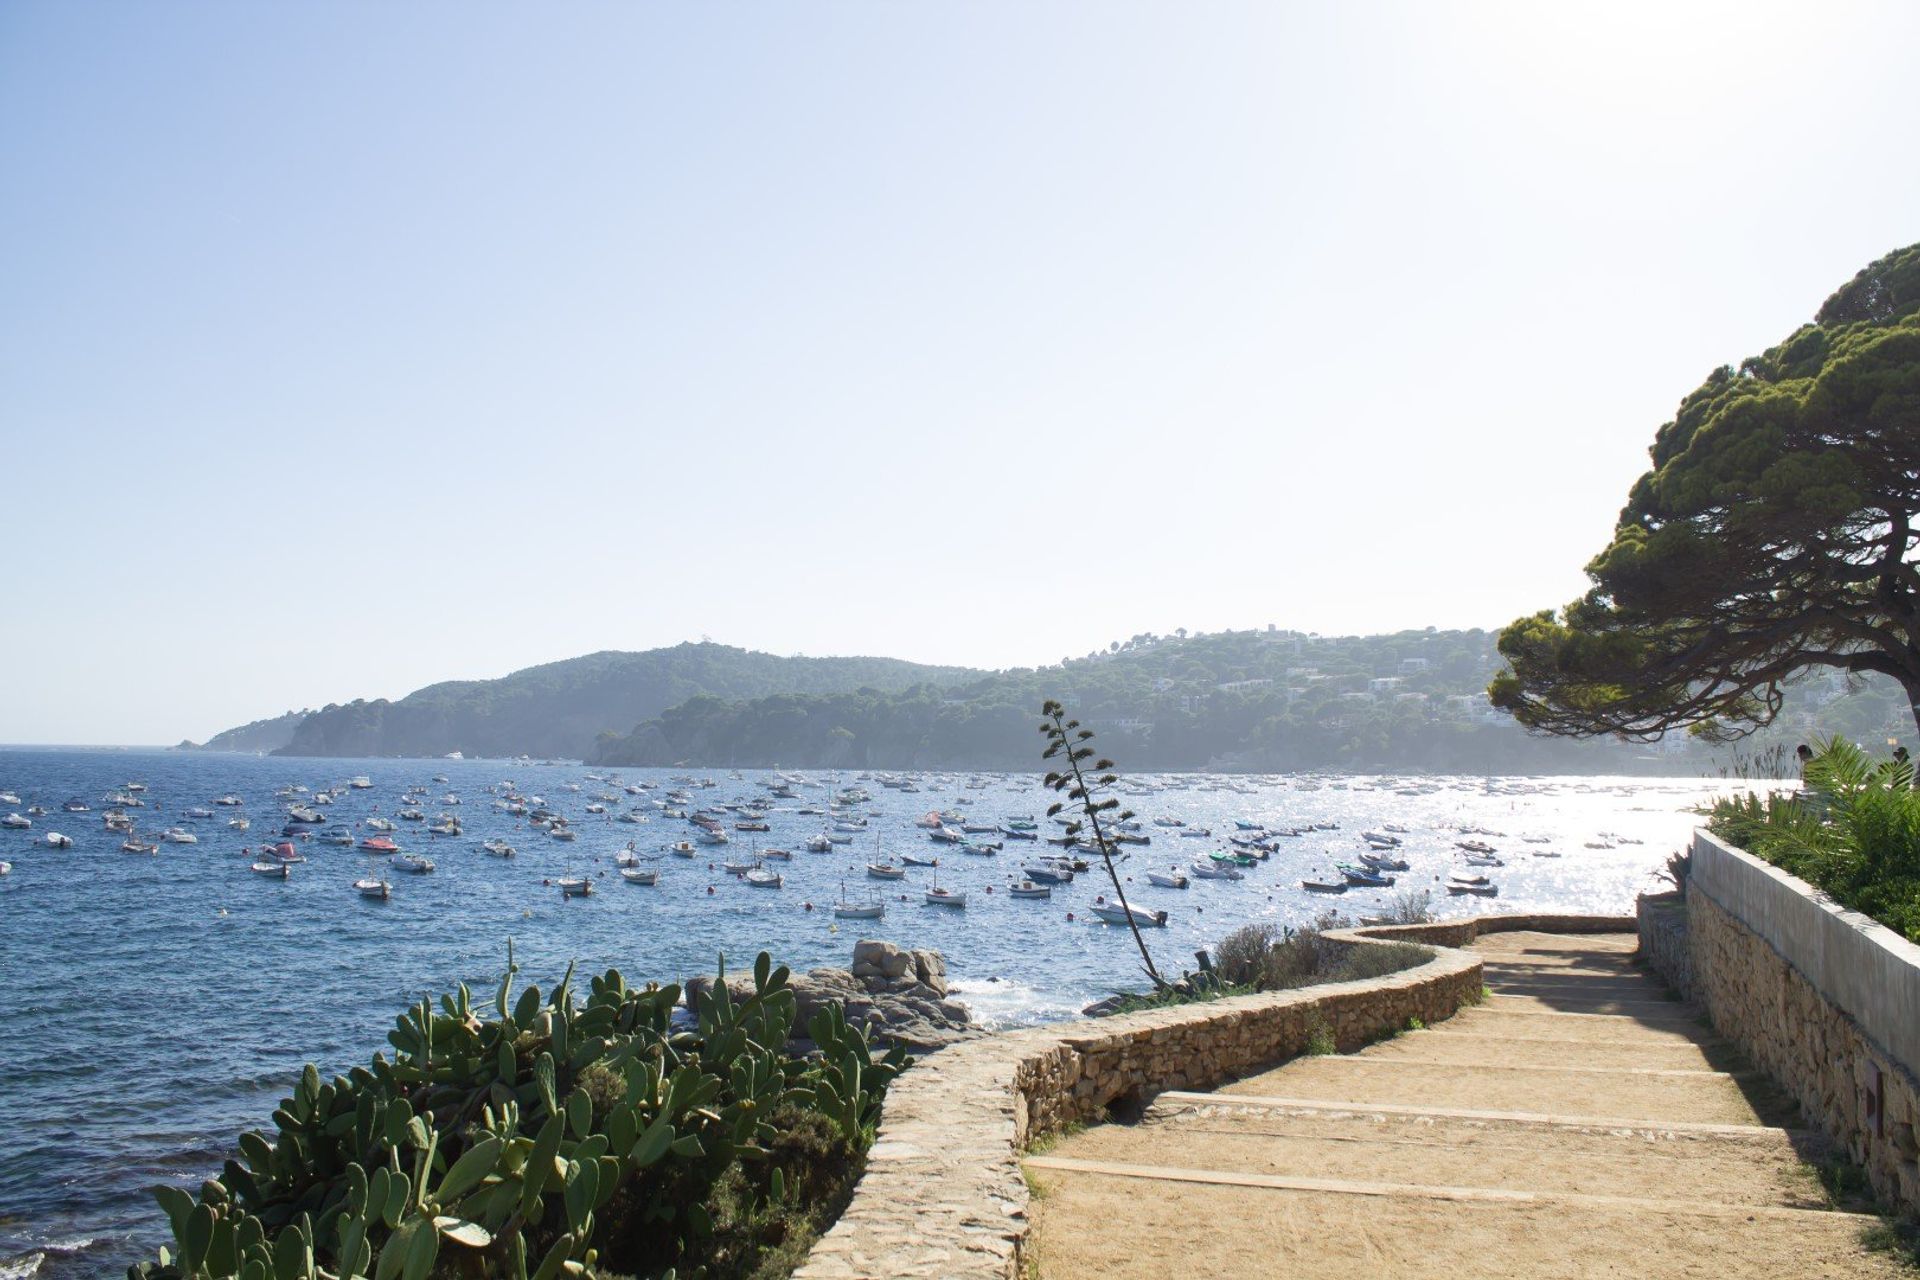 Take a 10-minute coastal walk from Calella de Palafrugell to Llafranc and take in the lush Costa Brava landscape